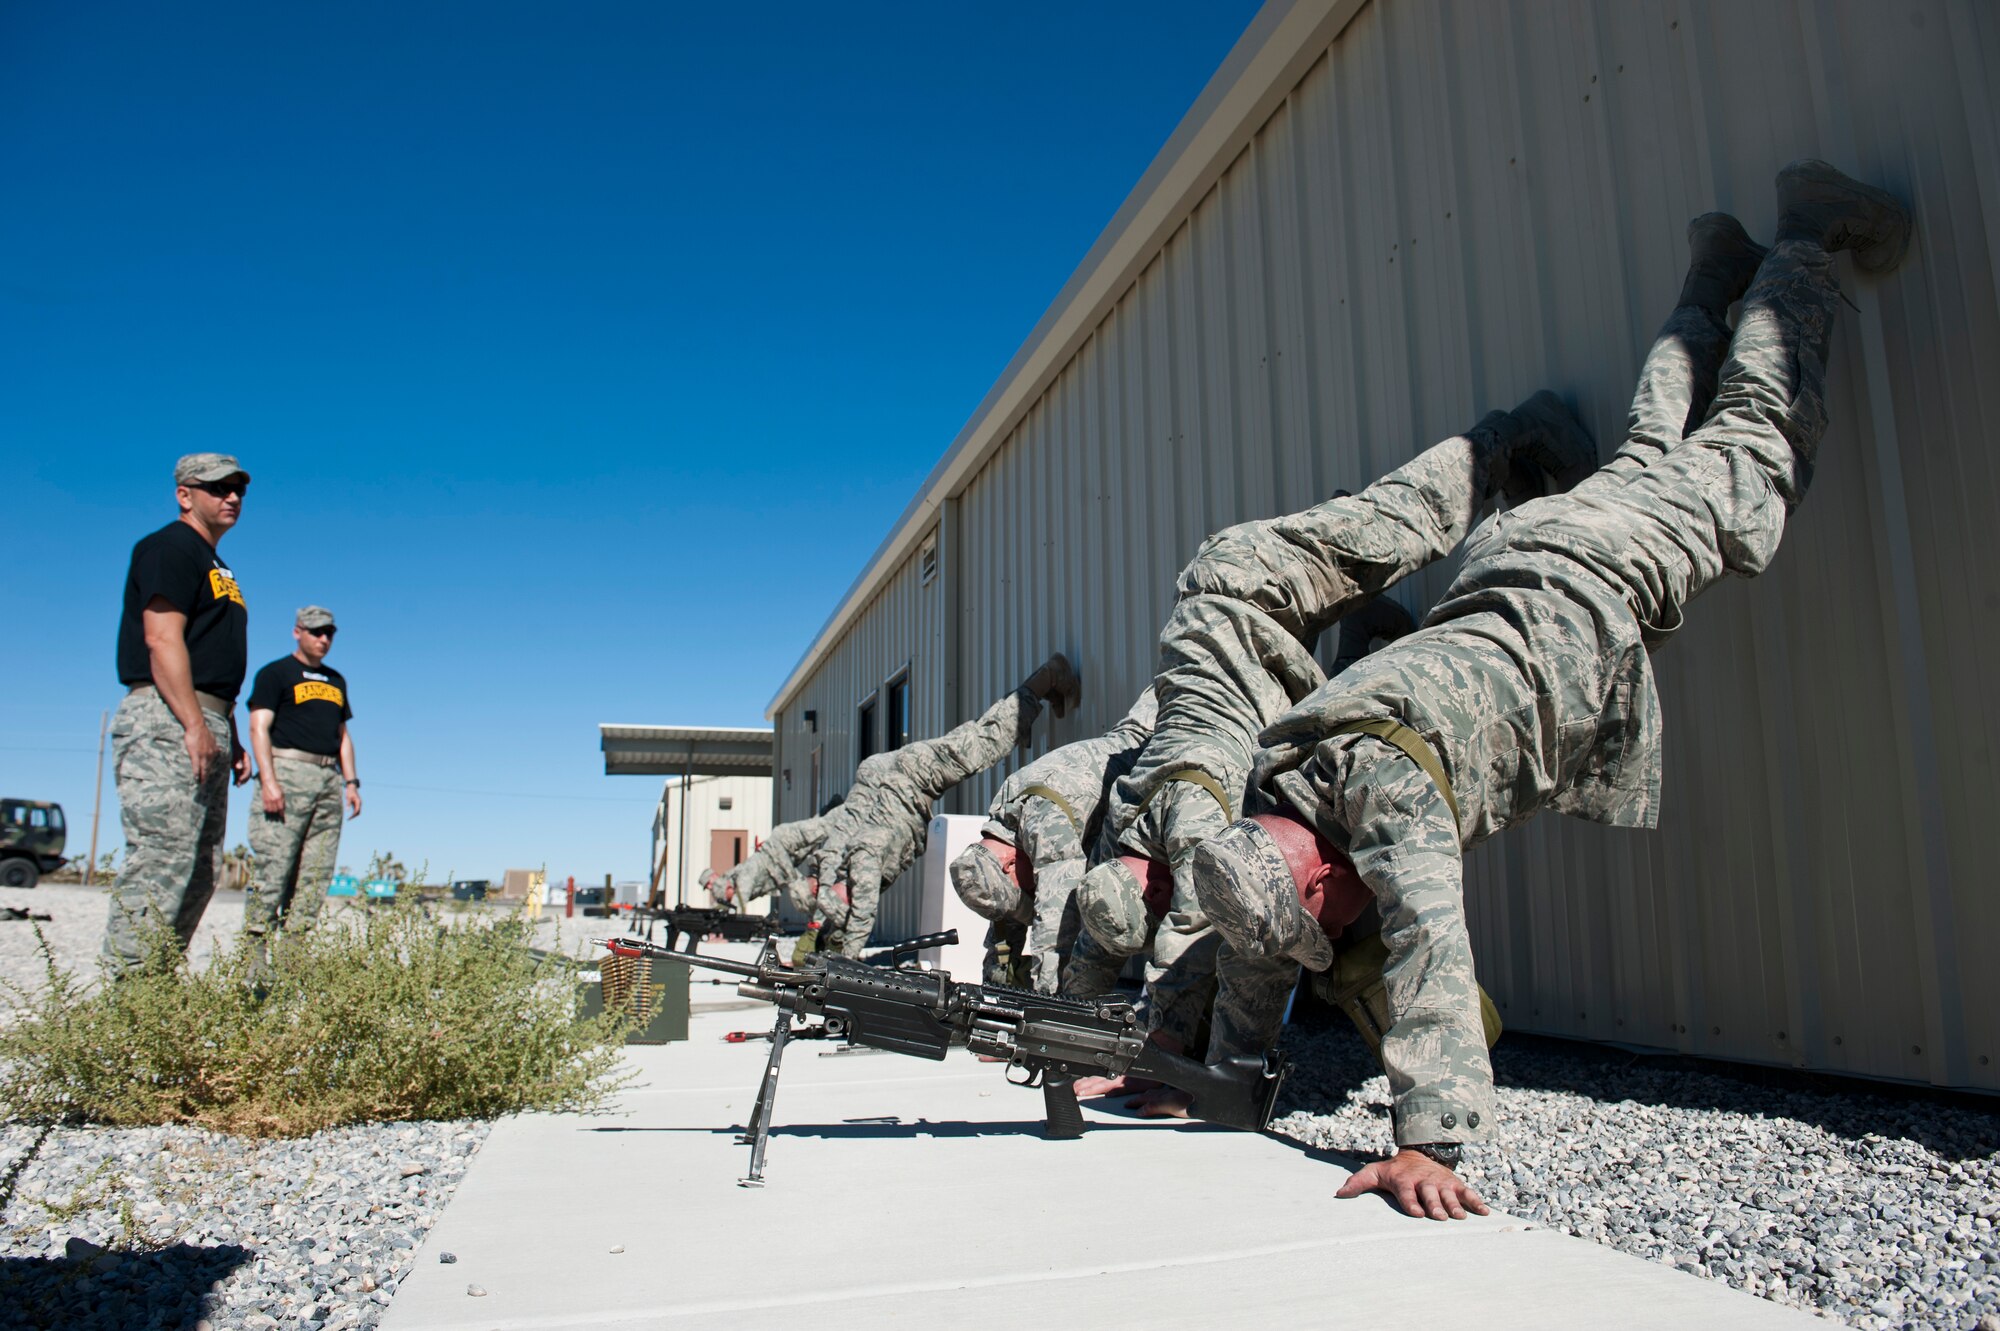 Students in the Ranger Assessment Course receive motivational training from their instructors at the Nevada Test and Training Range, Oct. 3, 2014. The RAC offers Airmen the opportunity to develop and prove themselves in an intense training environment to see whether or not they are ready to attend the U.S. Army Ranger School. (U.S. Air Force photo by Airman 1st Class Thomas Spangler)